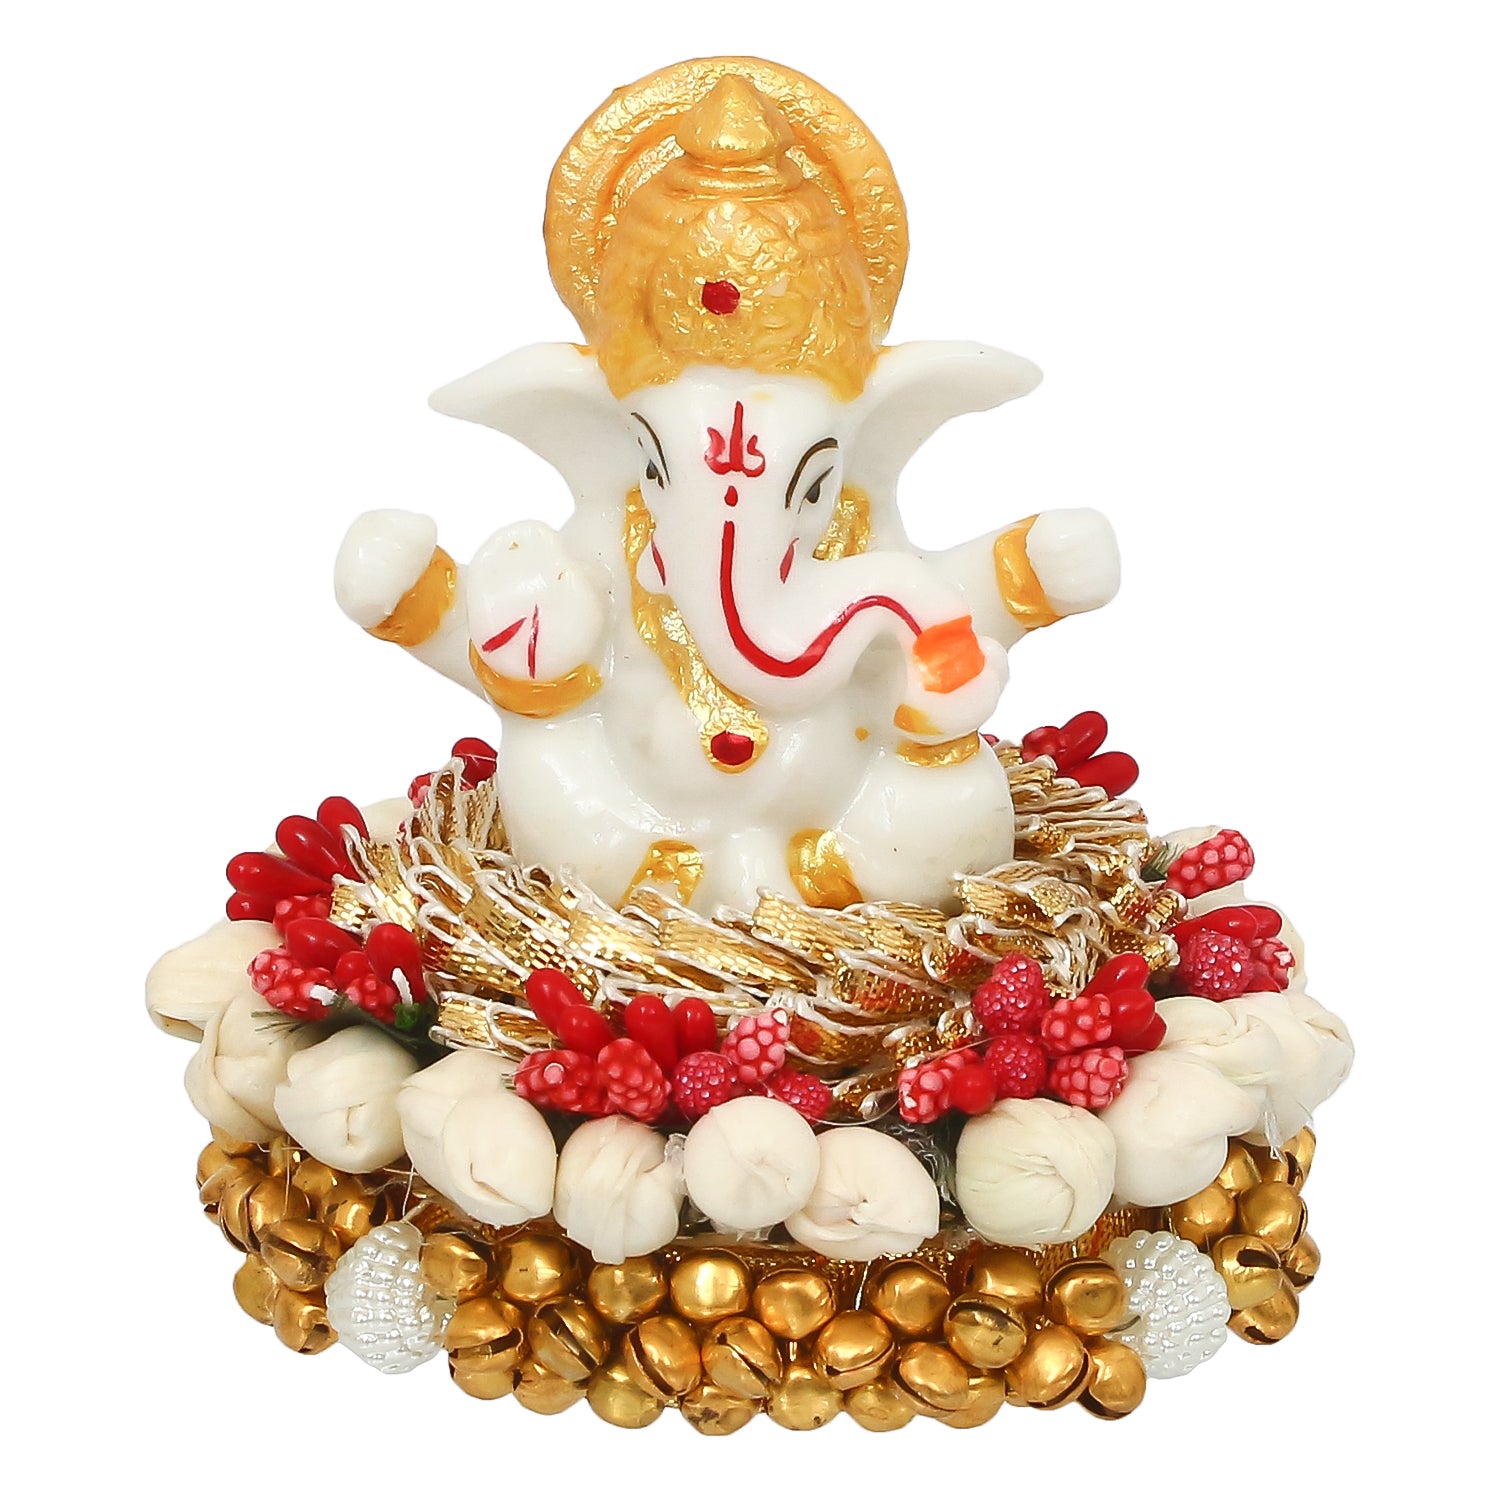 Polyresin Ganesha Idol on Decorative Handcrafted Plate for Home and Car Dashboard 1